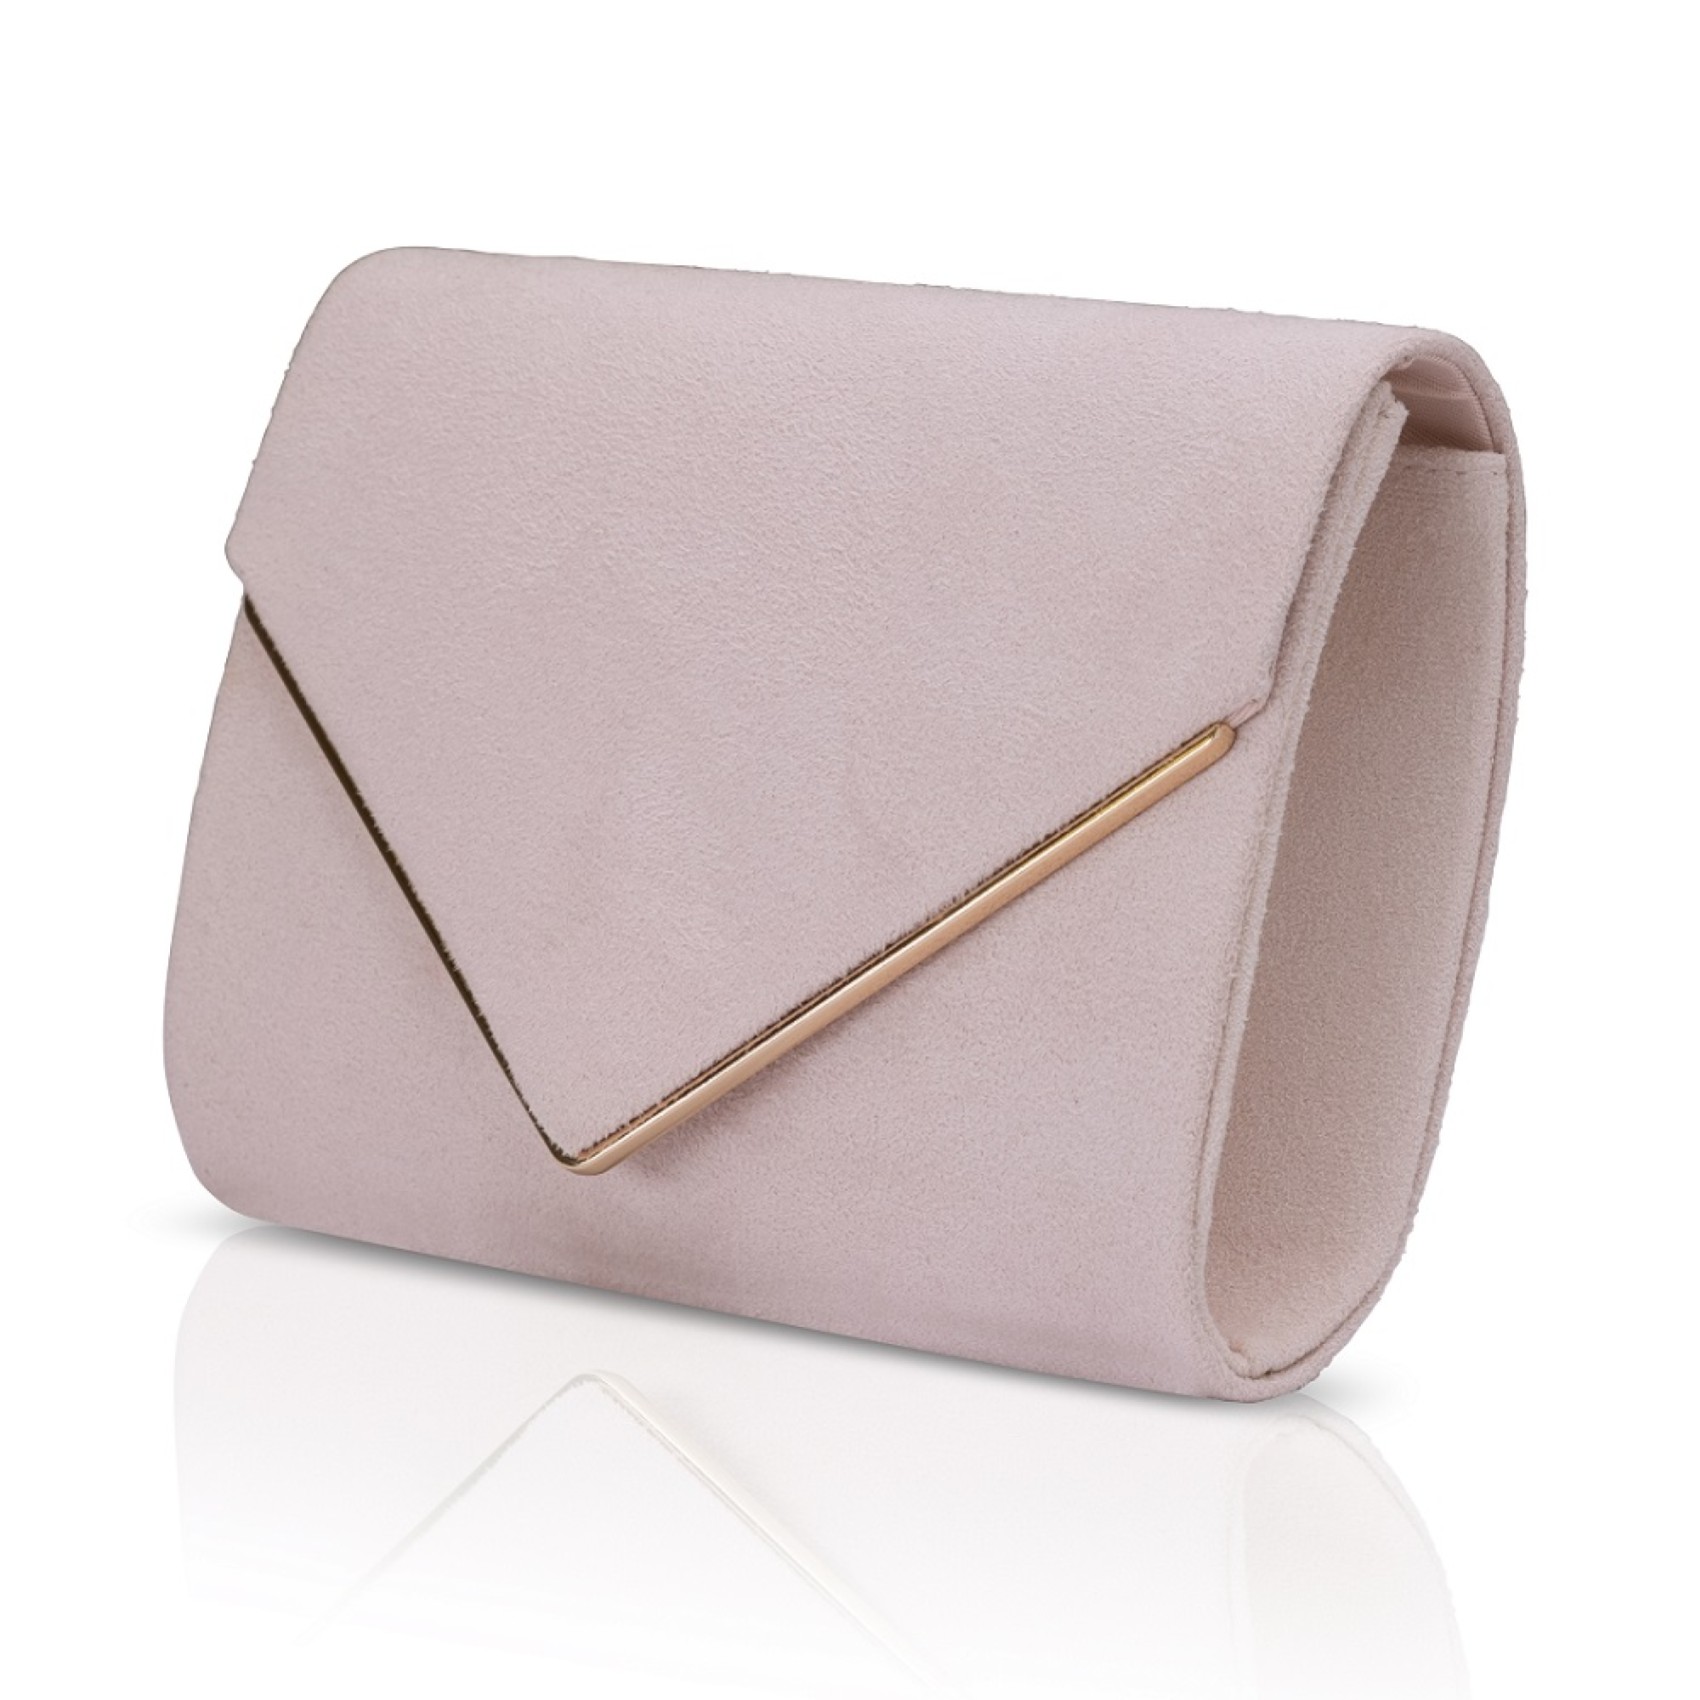 Missguided Nude Faux Suede Mini Tassel Clutch Bag, $34 | Missguided |  Lookastic